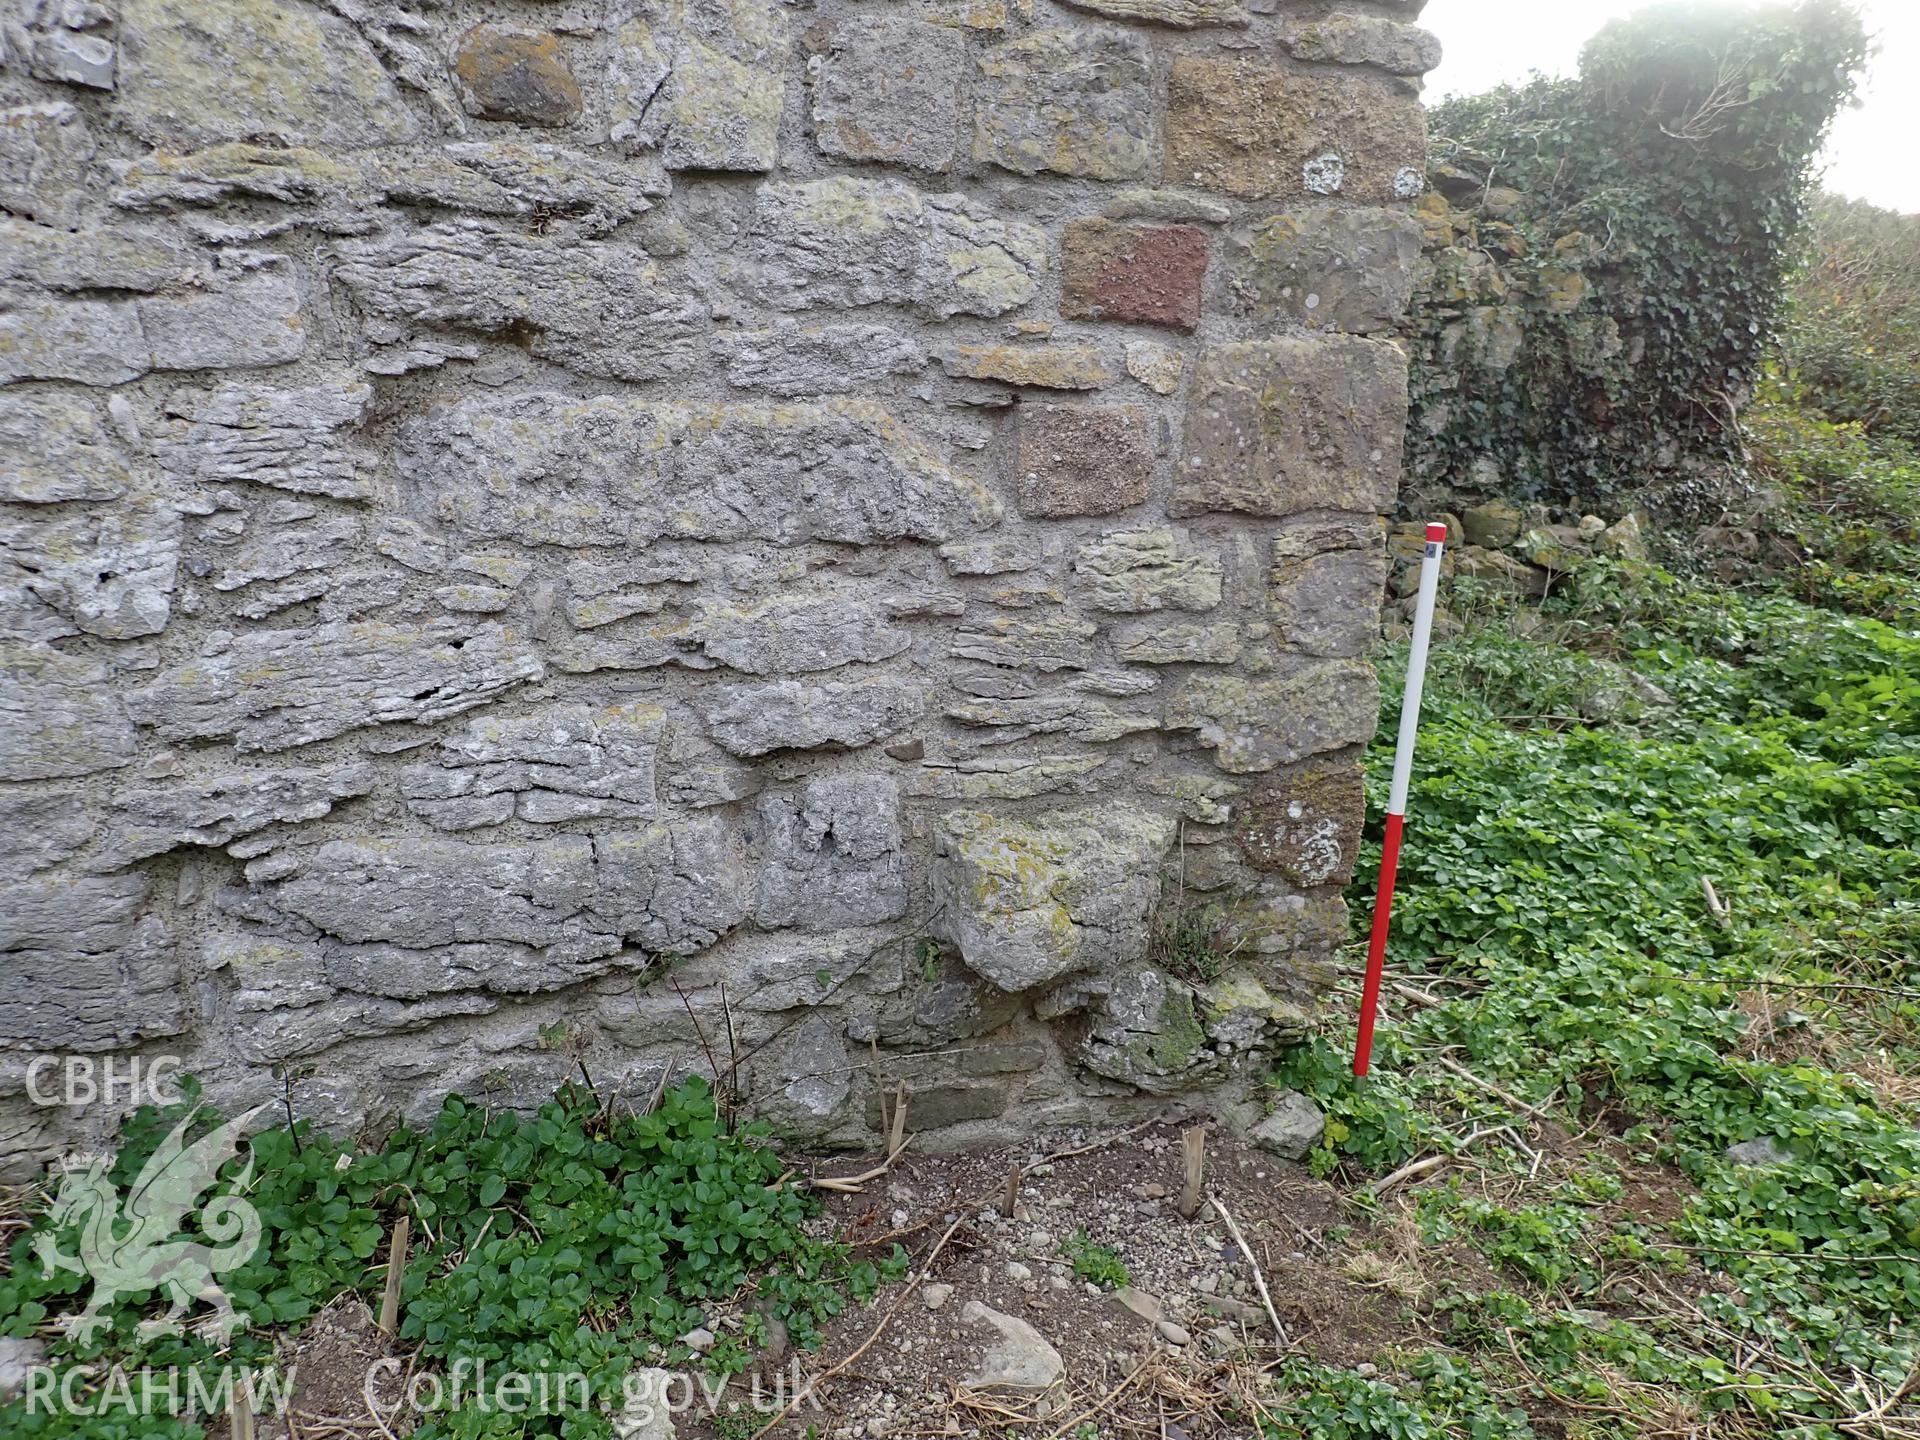 Investigator's photographic survey of the church on Puffin Island or Ynys Seiriol for the CHERISH Project. ? Crown: CHERISH PROJECT 2018. Produced with EU funds through the Ireland Wales Co-operation Programme 2014-2020. All material made freely available through the Open Government Licence.